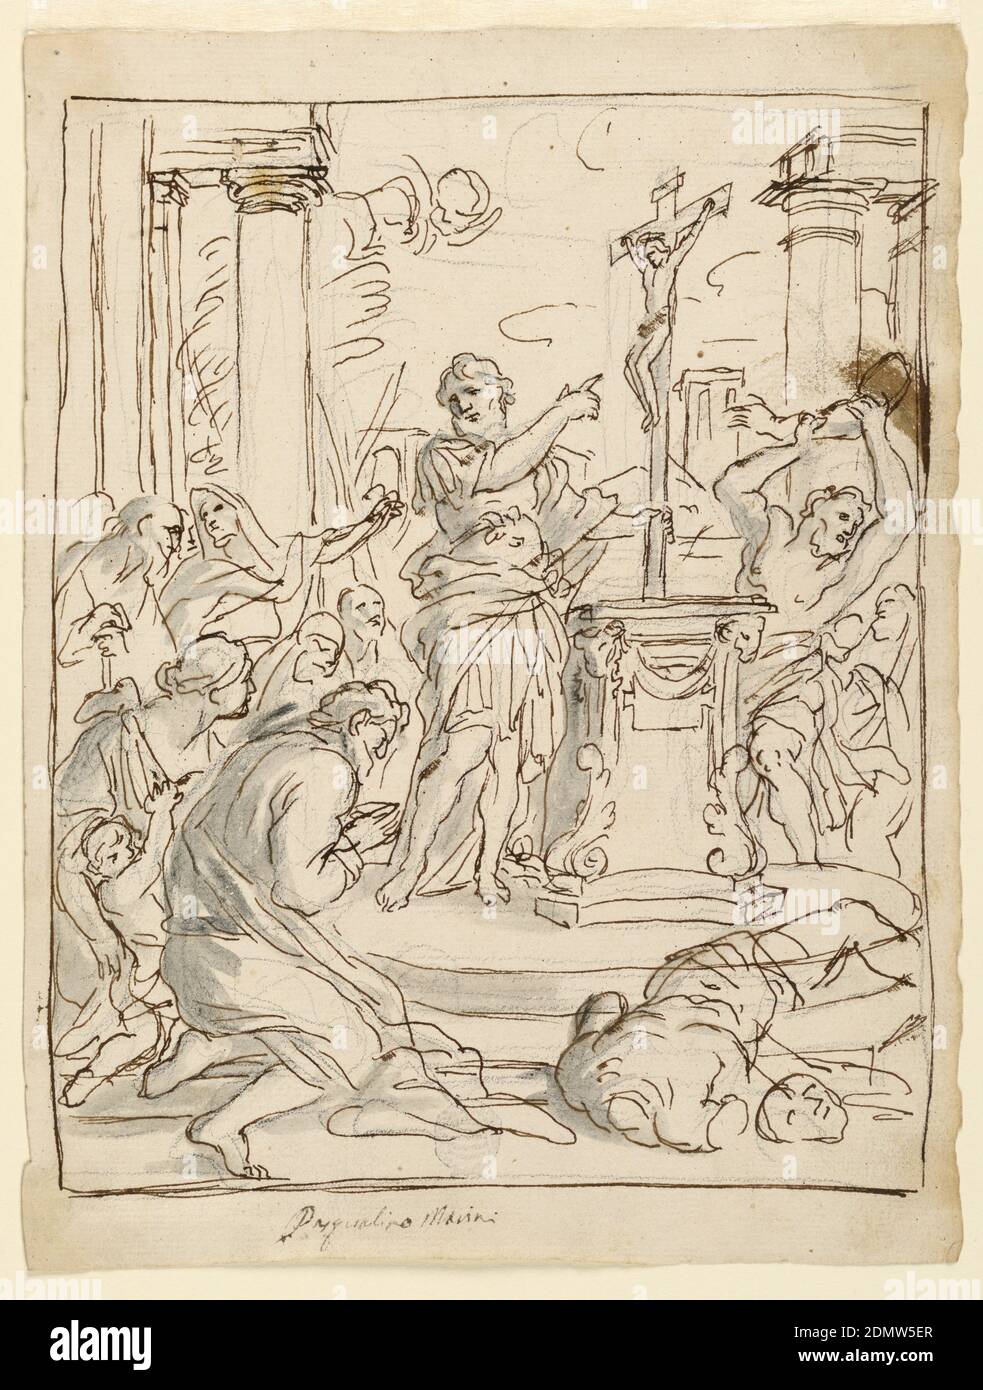 Sketches for paintings. Obverse: A Roman officer holds a crucifix upon a heathen altar. Reverse: Christ rising, Pasqualino Marini, Black crayon; Obverse: with pen ink, black watercolor wash on paper, Obverse: A bearded Roman soldier points at the crucifix he holds with his left hand on an altar. People in adoration are shown at left. A man smashes an idol at right. Framing lines. Reverse: A slight horizontal sketch and the left edge is framed by a segment between straight lines, Rome, Italy, ca. 1700, figures, Drawing Stock Photo